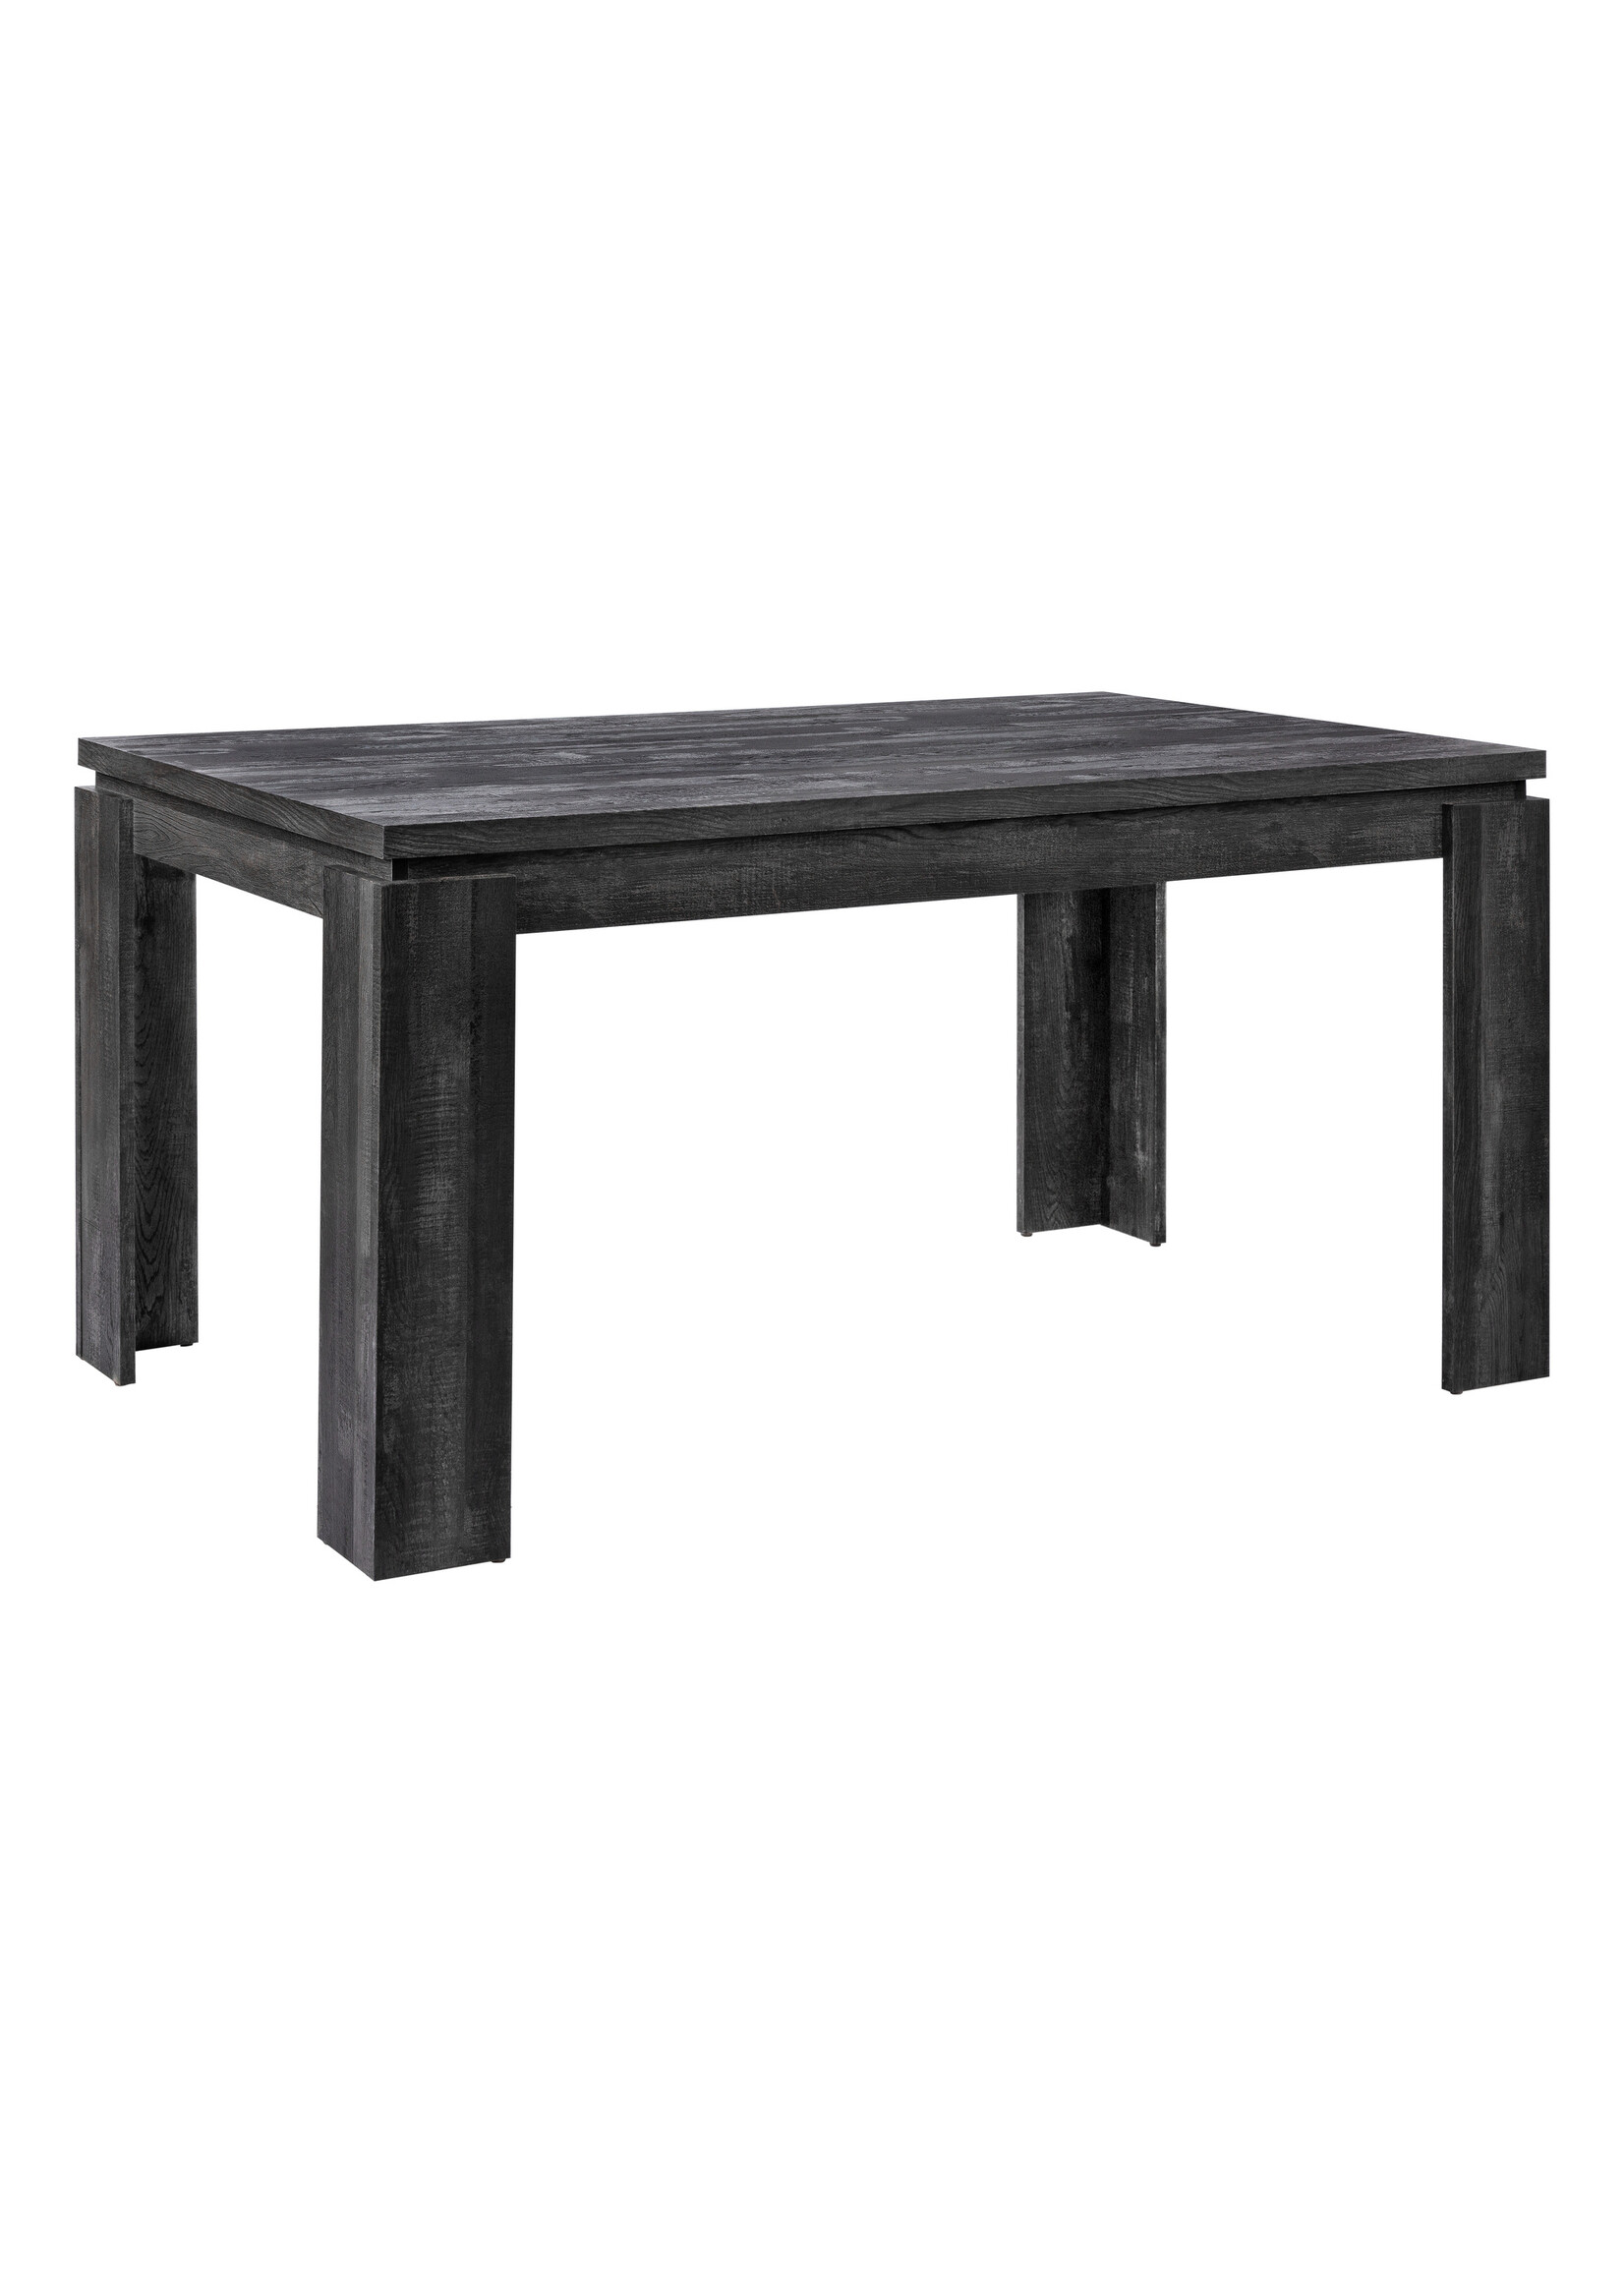 DINING TABLE - 36"X 60" / BLACK RECLAIMED WOOD-LOOK